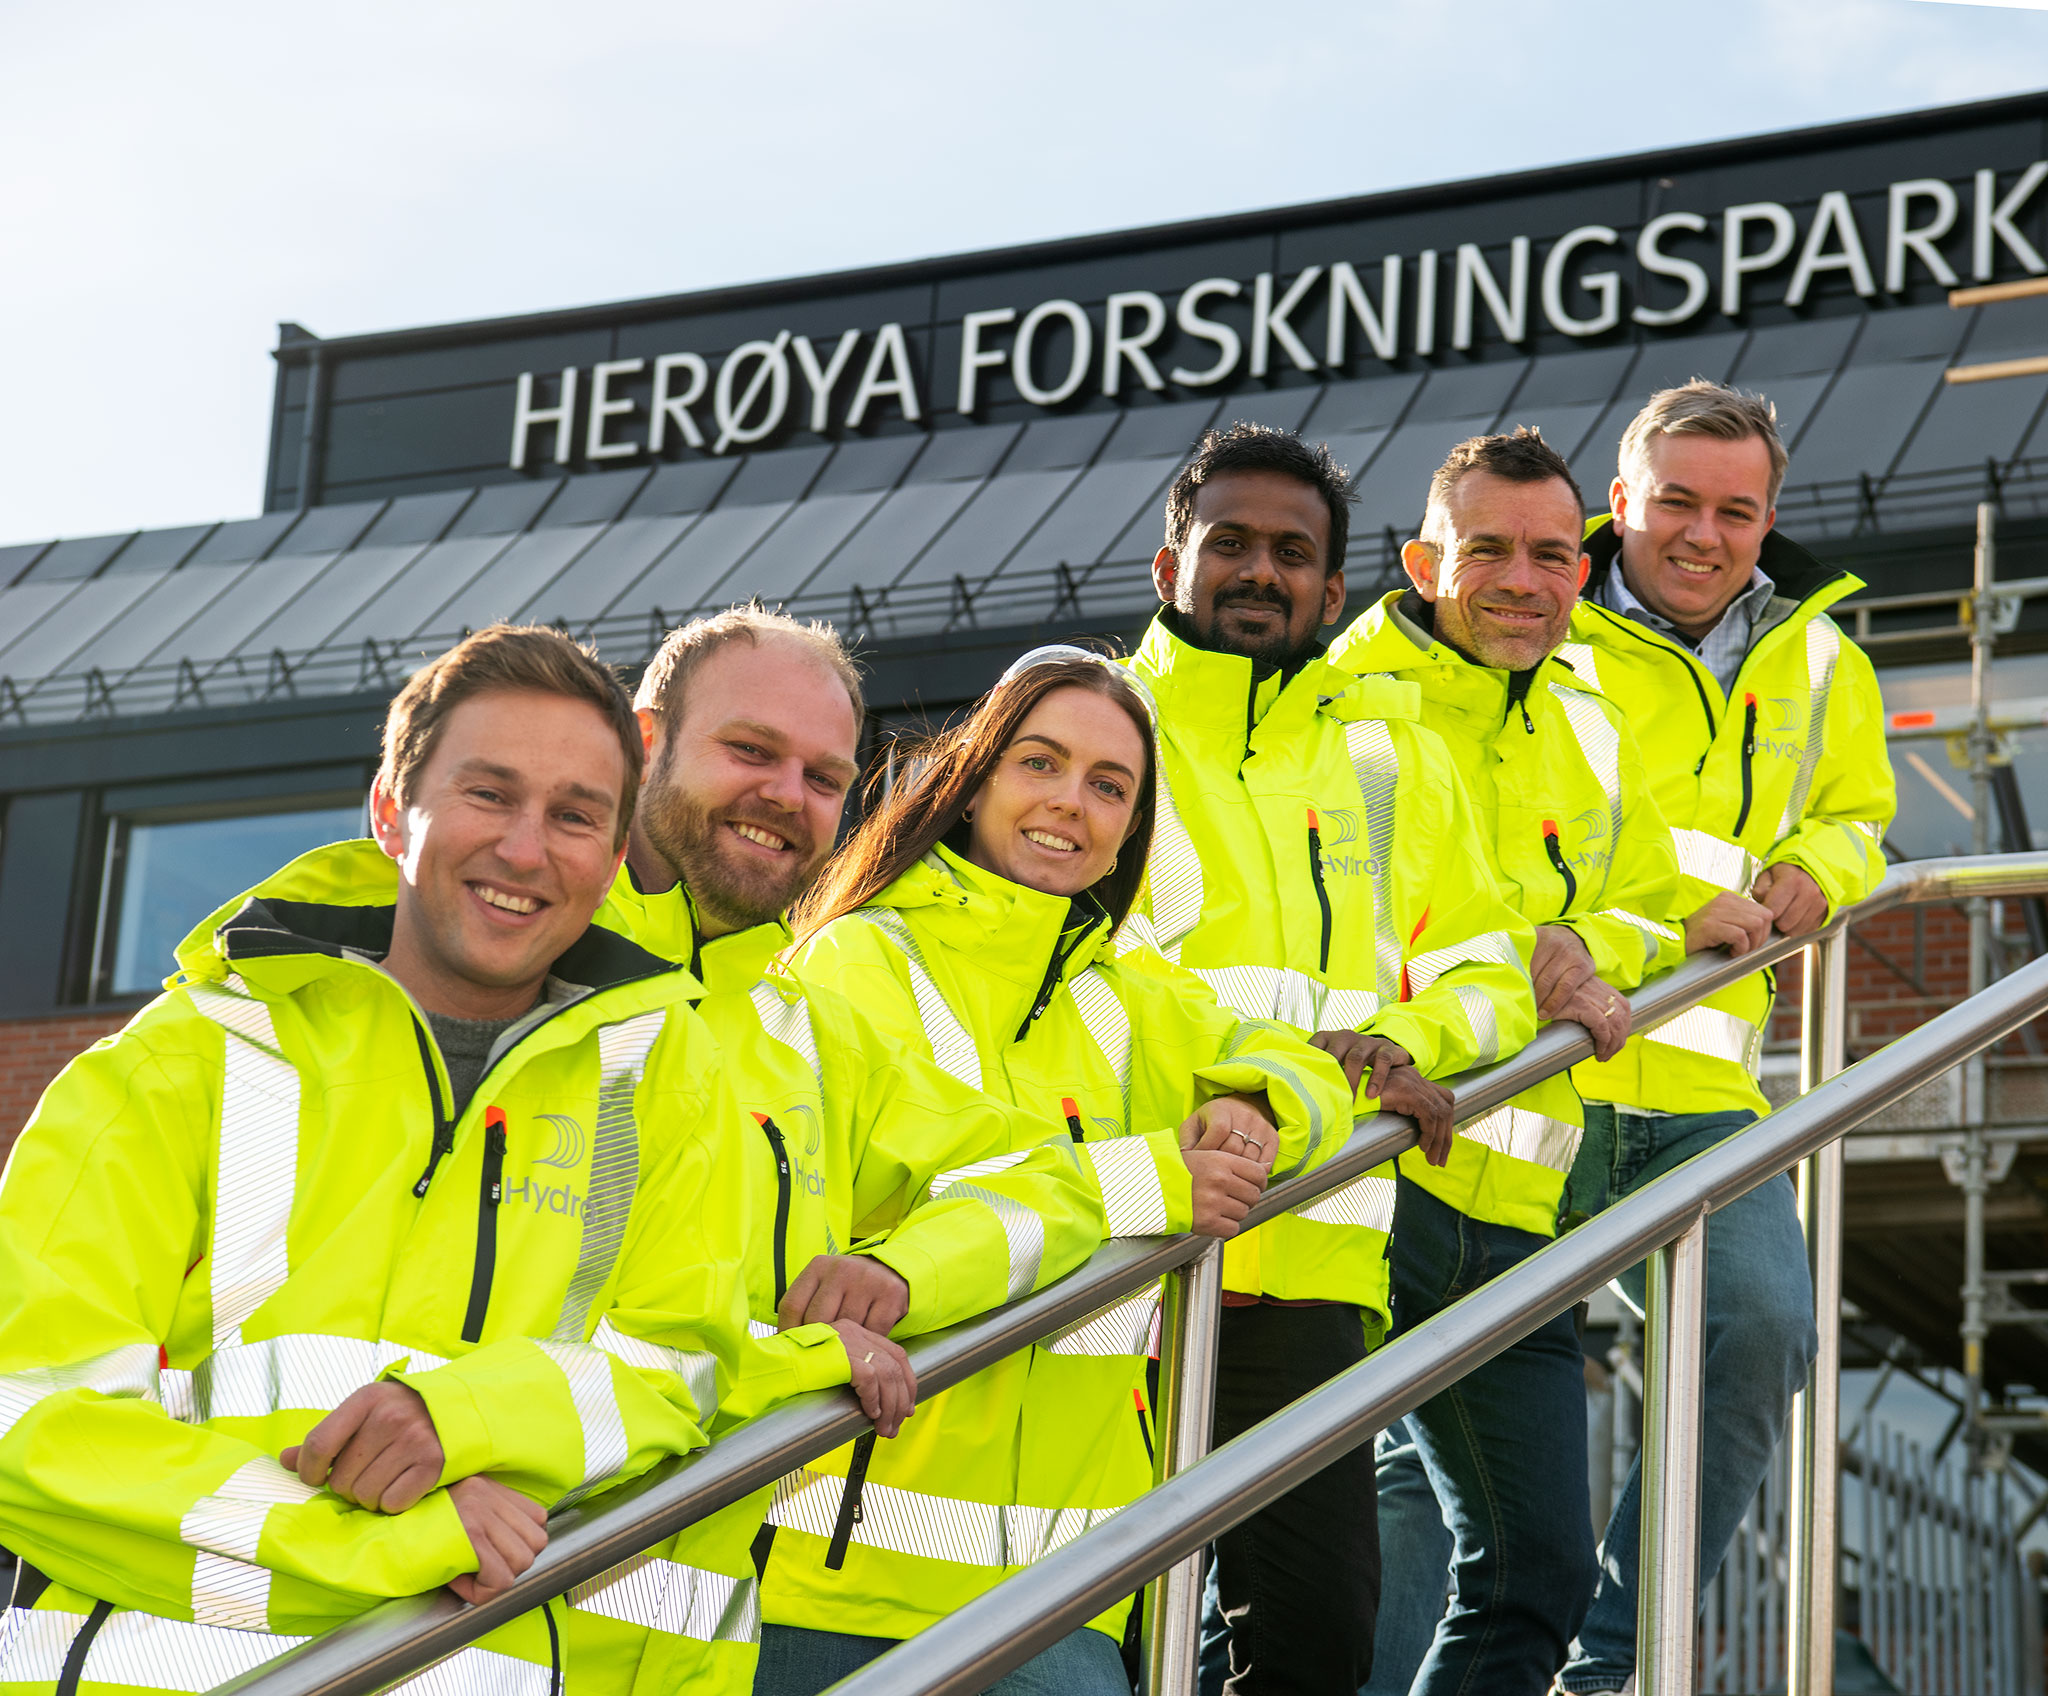 Six people, dressed in yellow jackets, pose, stand up a flight of stairs and lean against the railing outside a brick building. On the top of the building, large letters that read Herøya Forskningspark are partially displayed